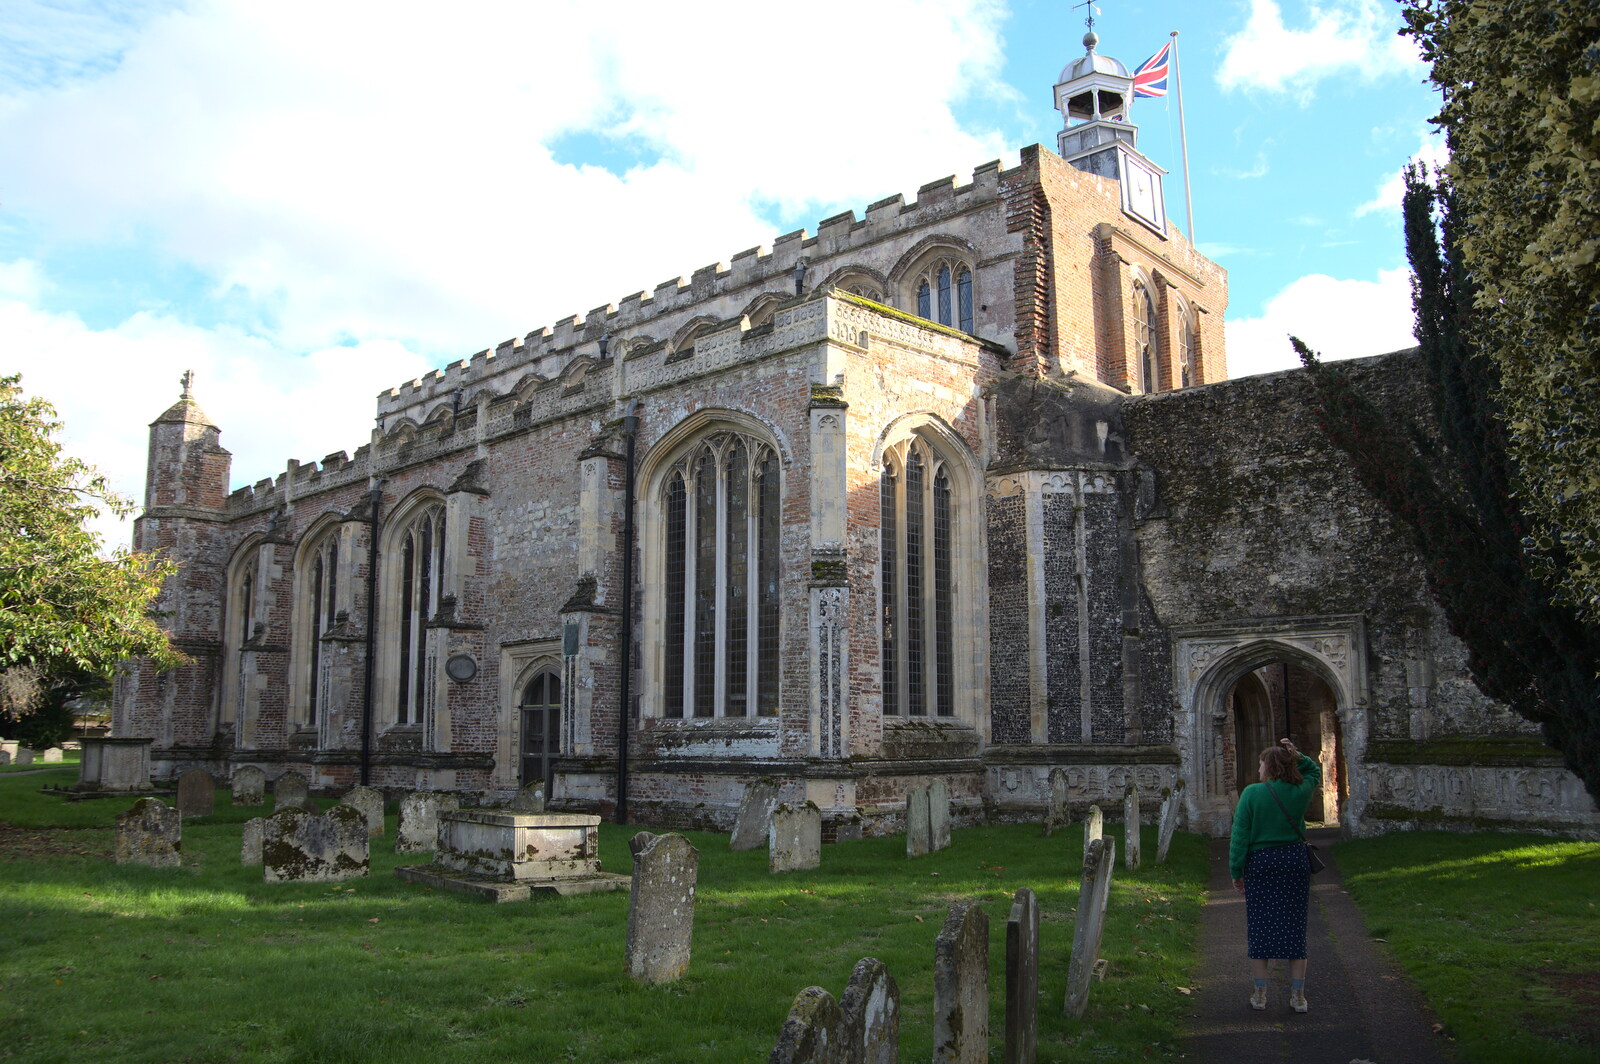 A Postcard from Flatford and Dedham, Suffolk and Essex, 9th November 2022: St. Mary the Virgin in East Bergholt